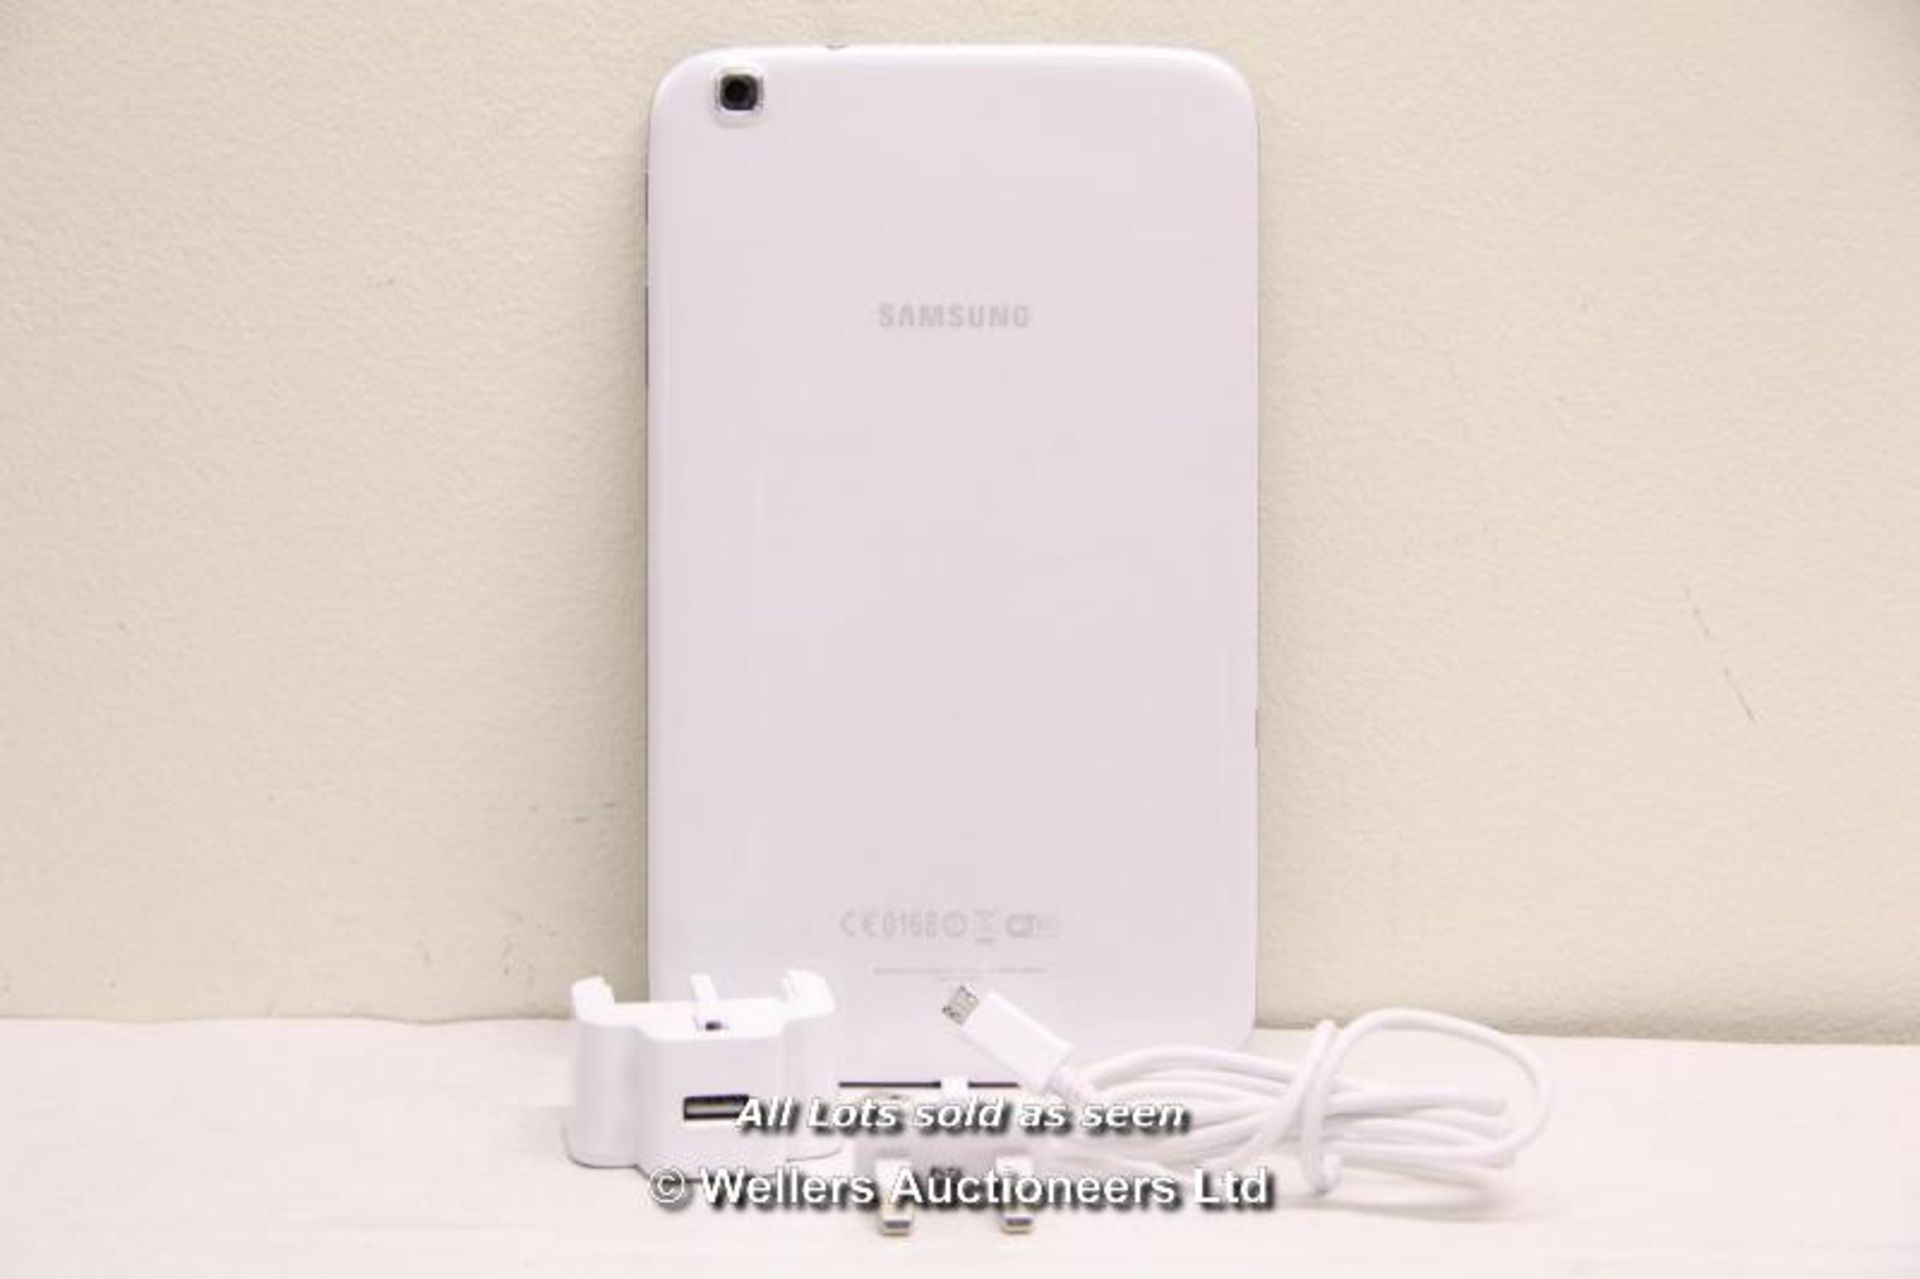 SAMSUNG GALAXY TAB 3 SM-T310 16GB WI-FI  8" - WHITE (36064306) / INCLUDING CHARGER AND USB CABLE / - Image 2 of 2